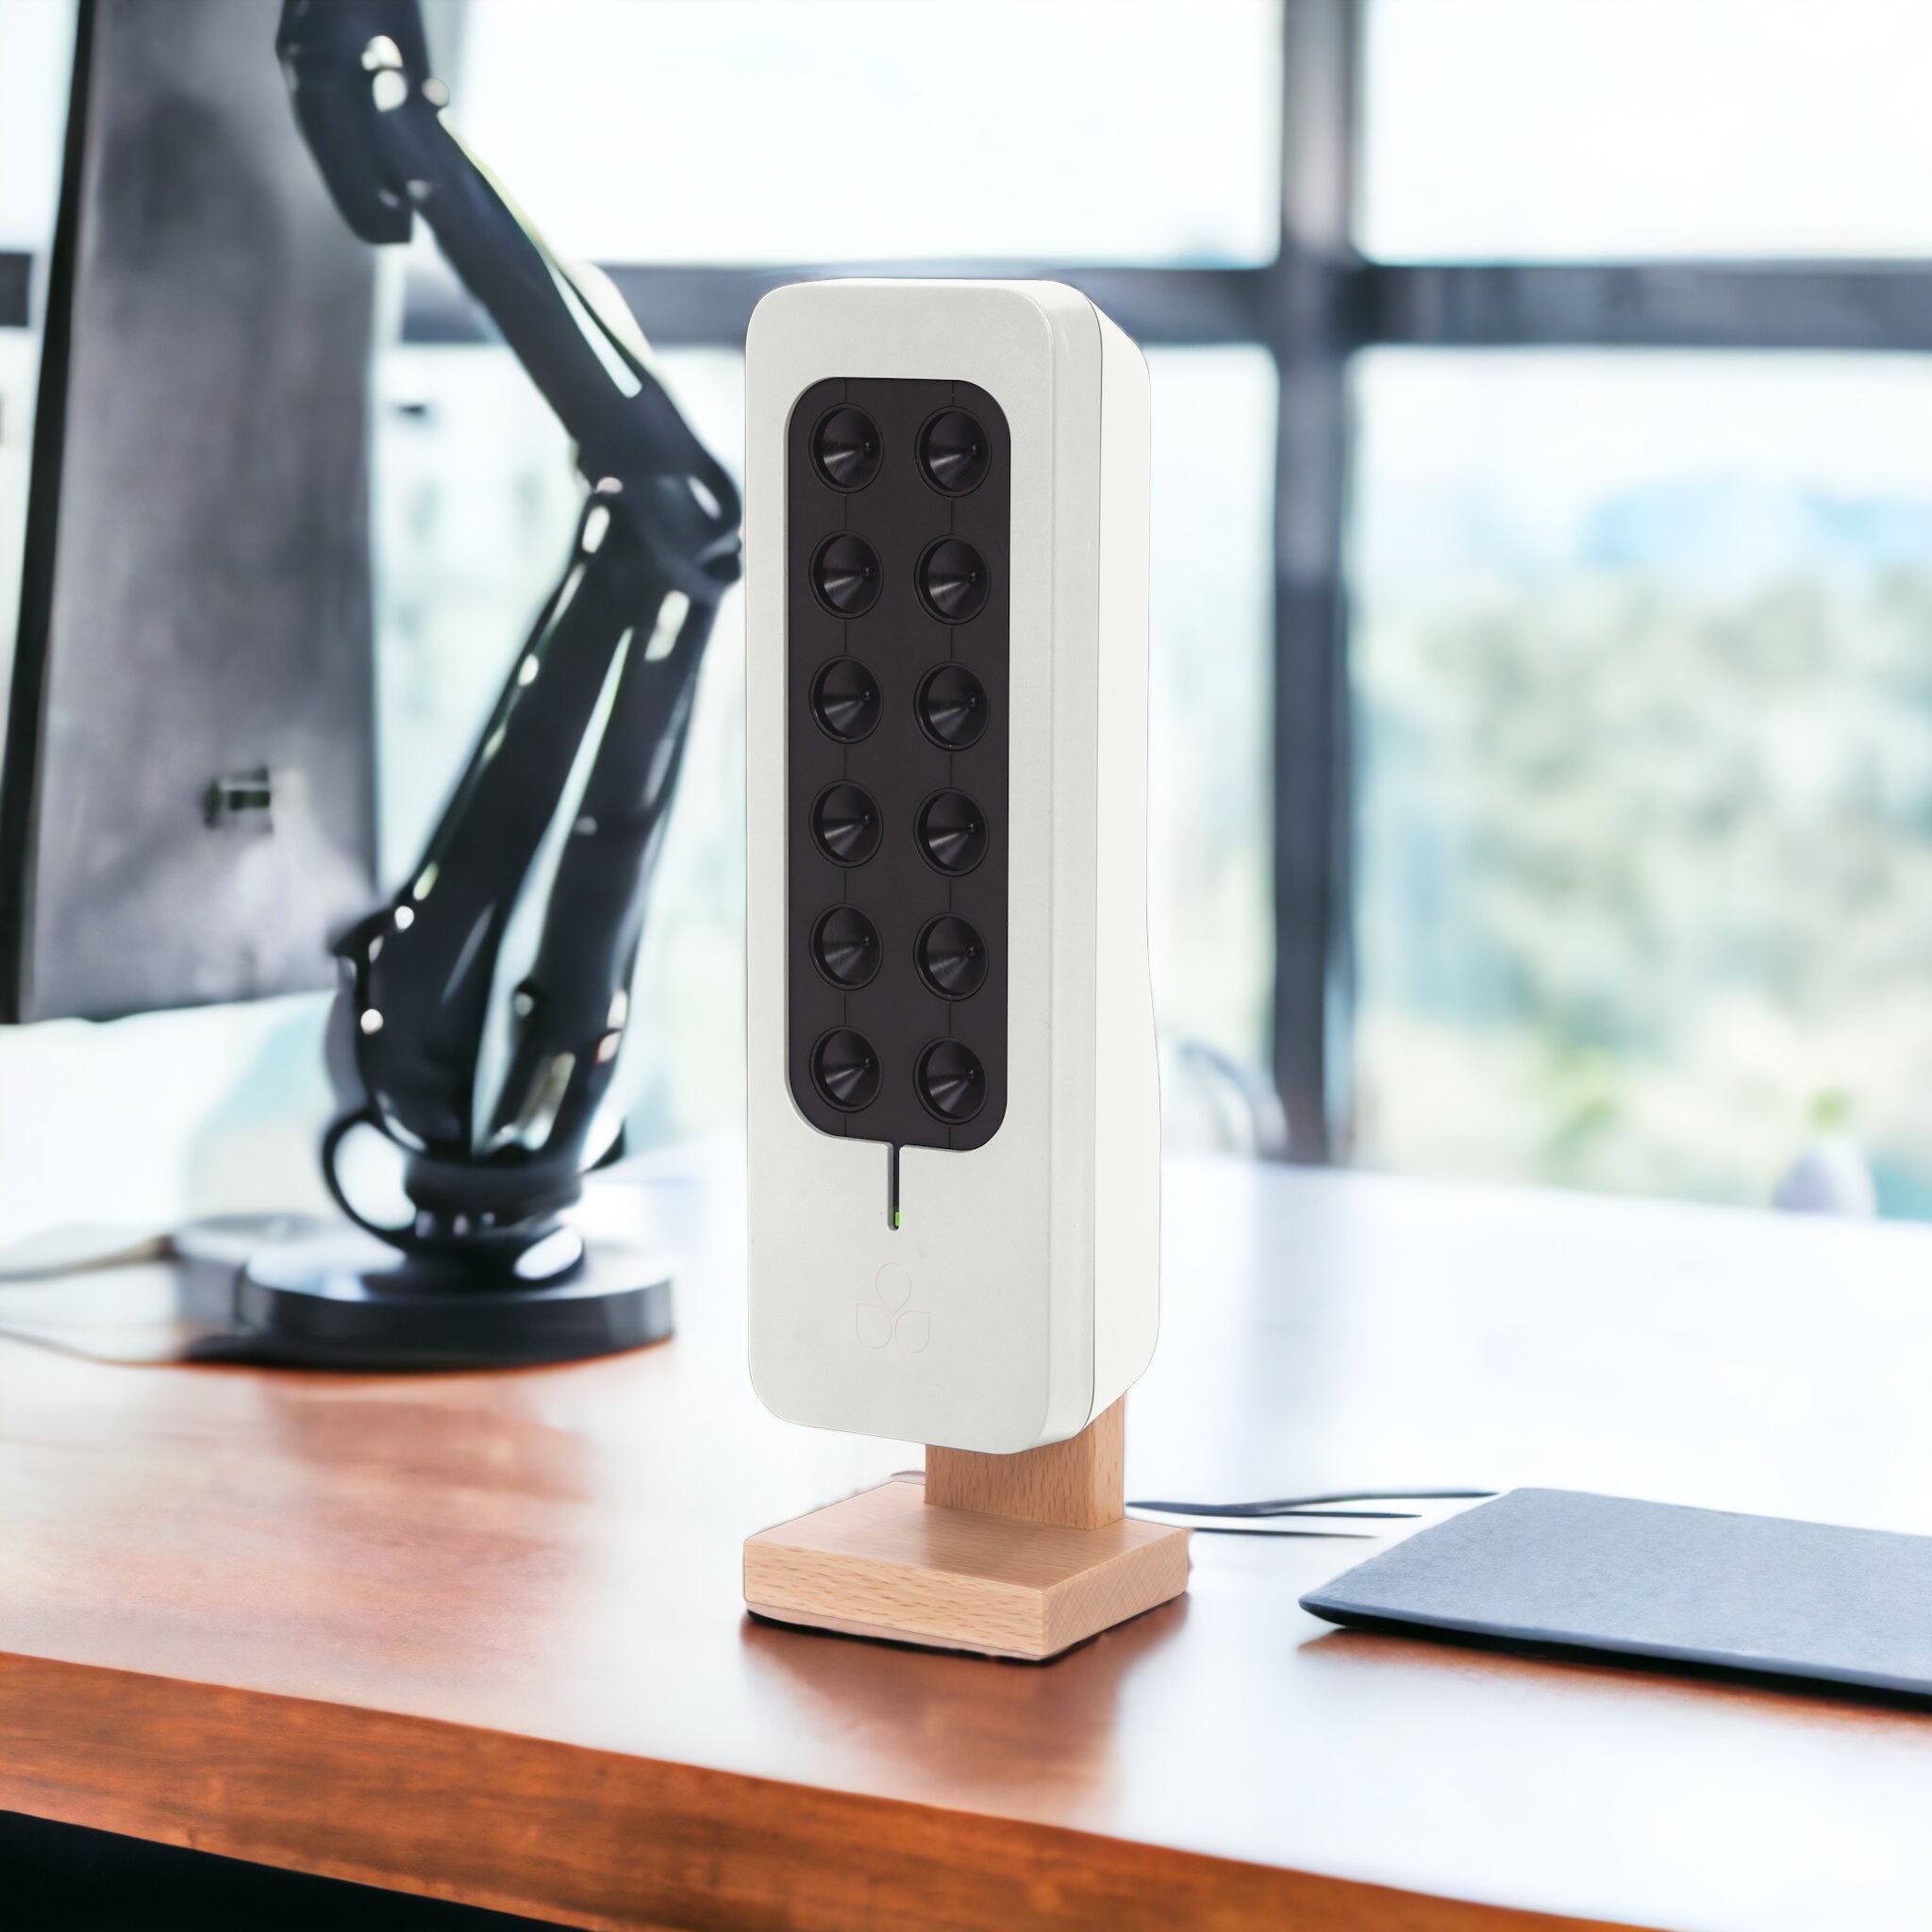 Teqoya DESK - The ultimate air purifier for your desk and bedroom! Teqoya